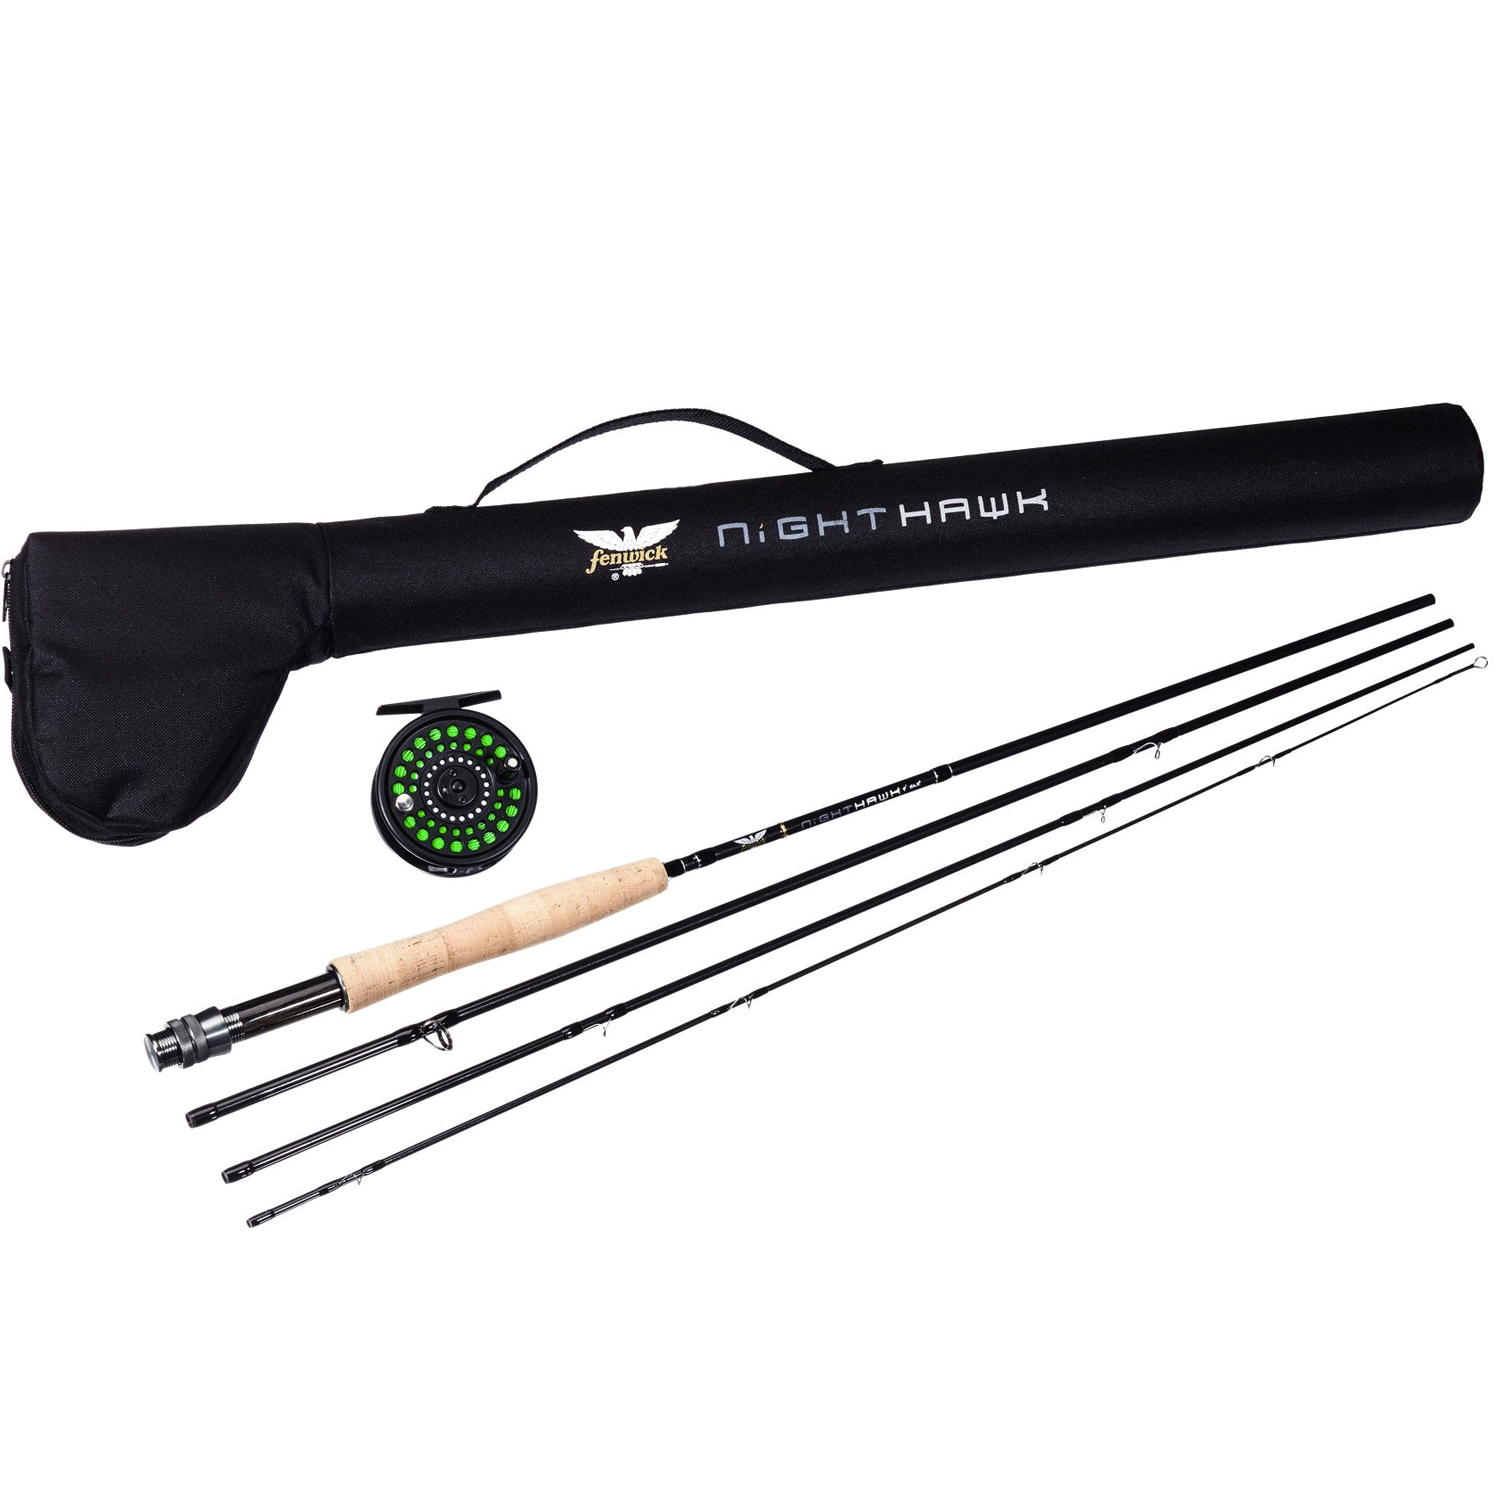 Fenwick Nighthawk X Fly Kit - The Painted Trout